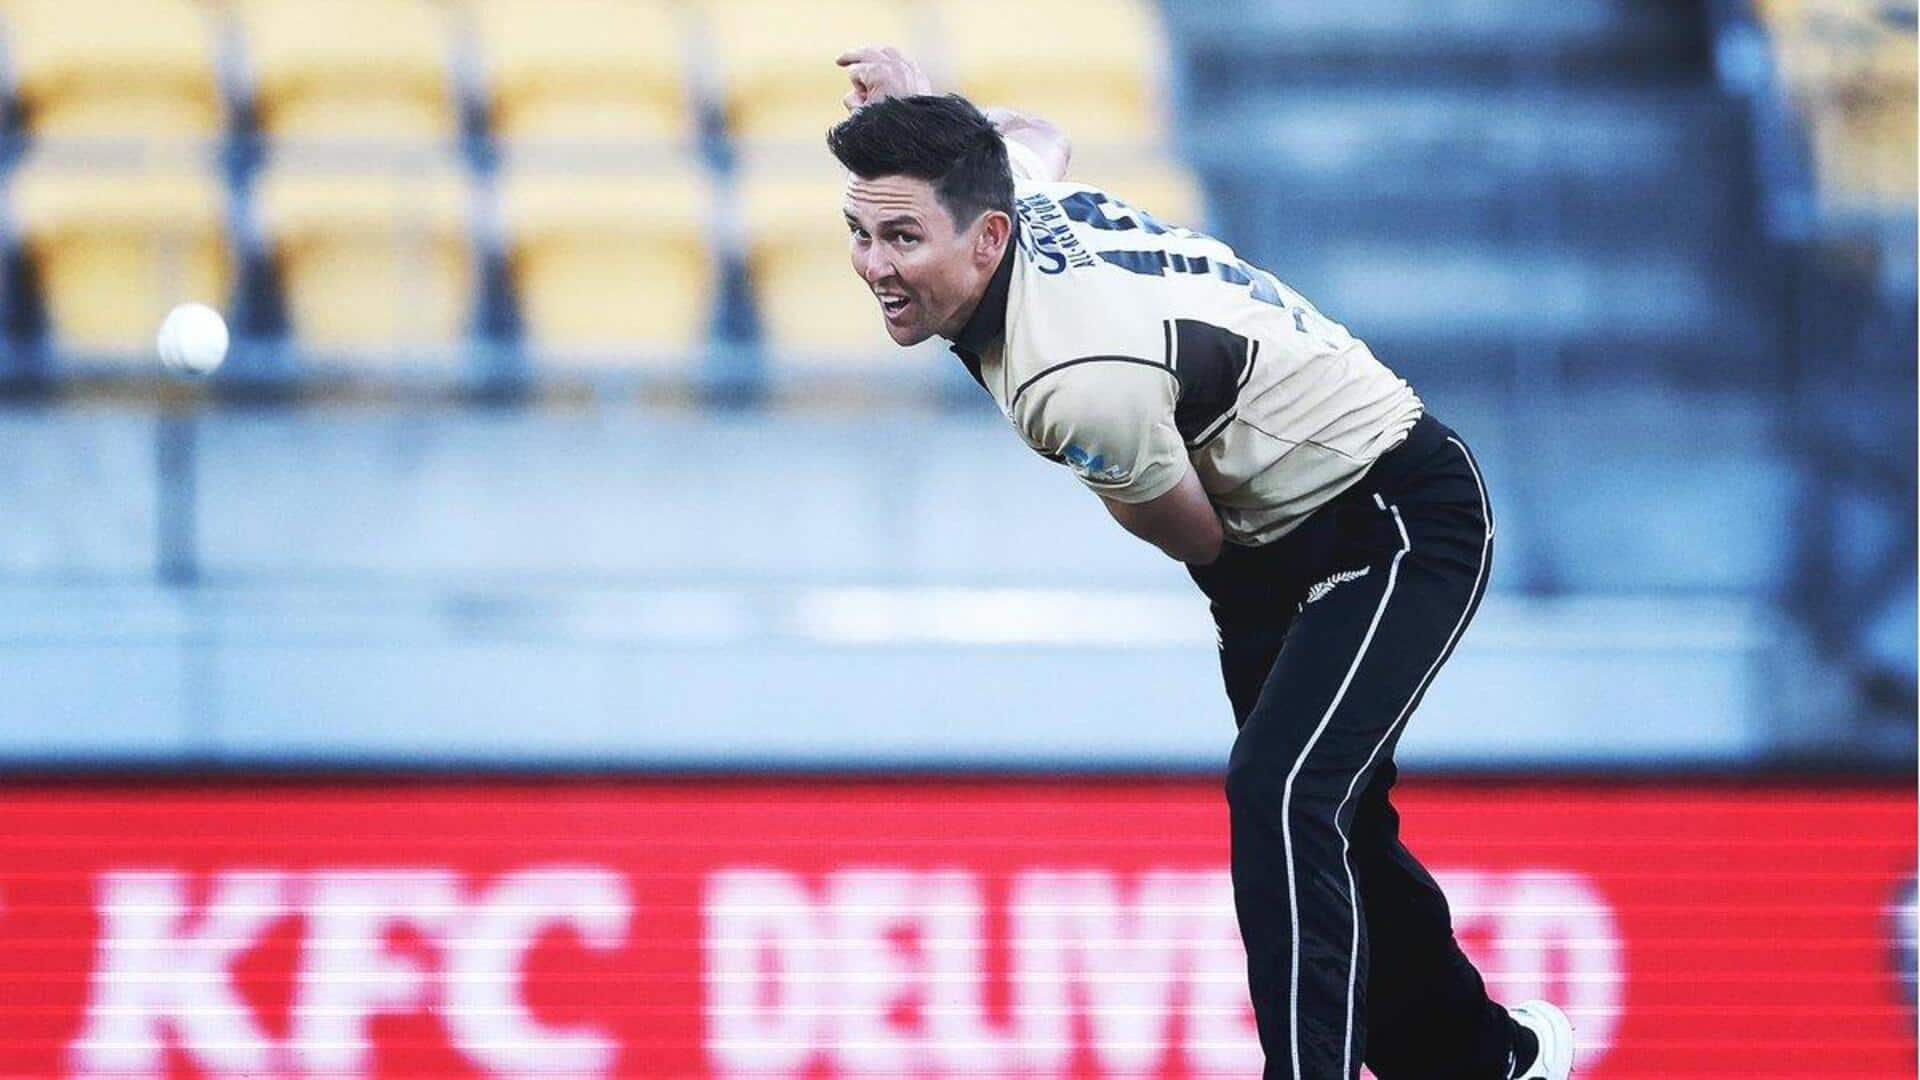 Lesser-known records of Trent Boult in T20I cricket